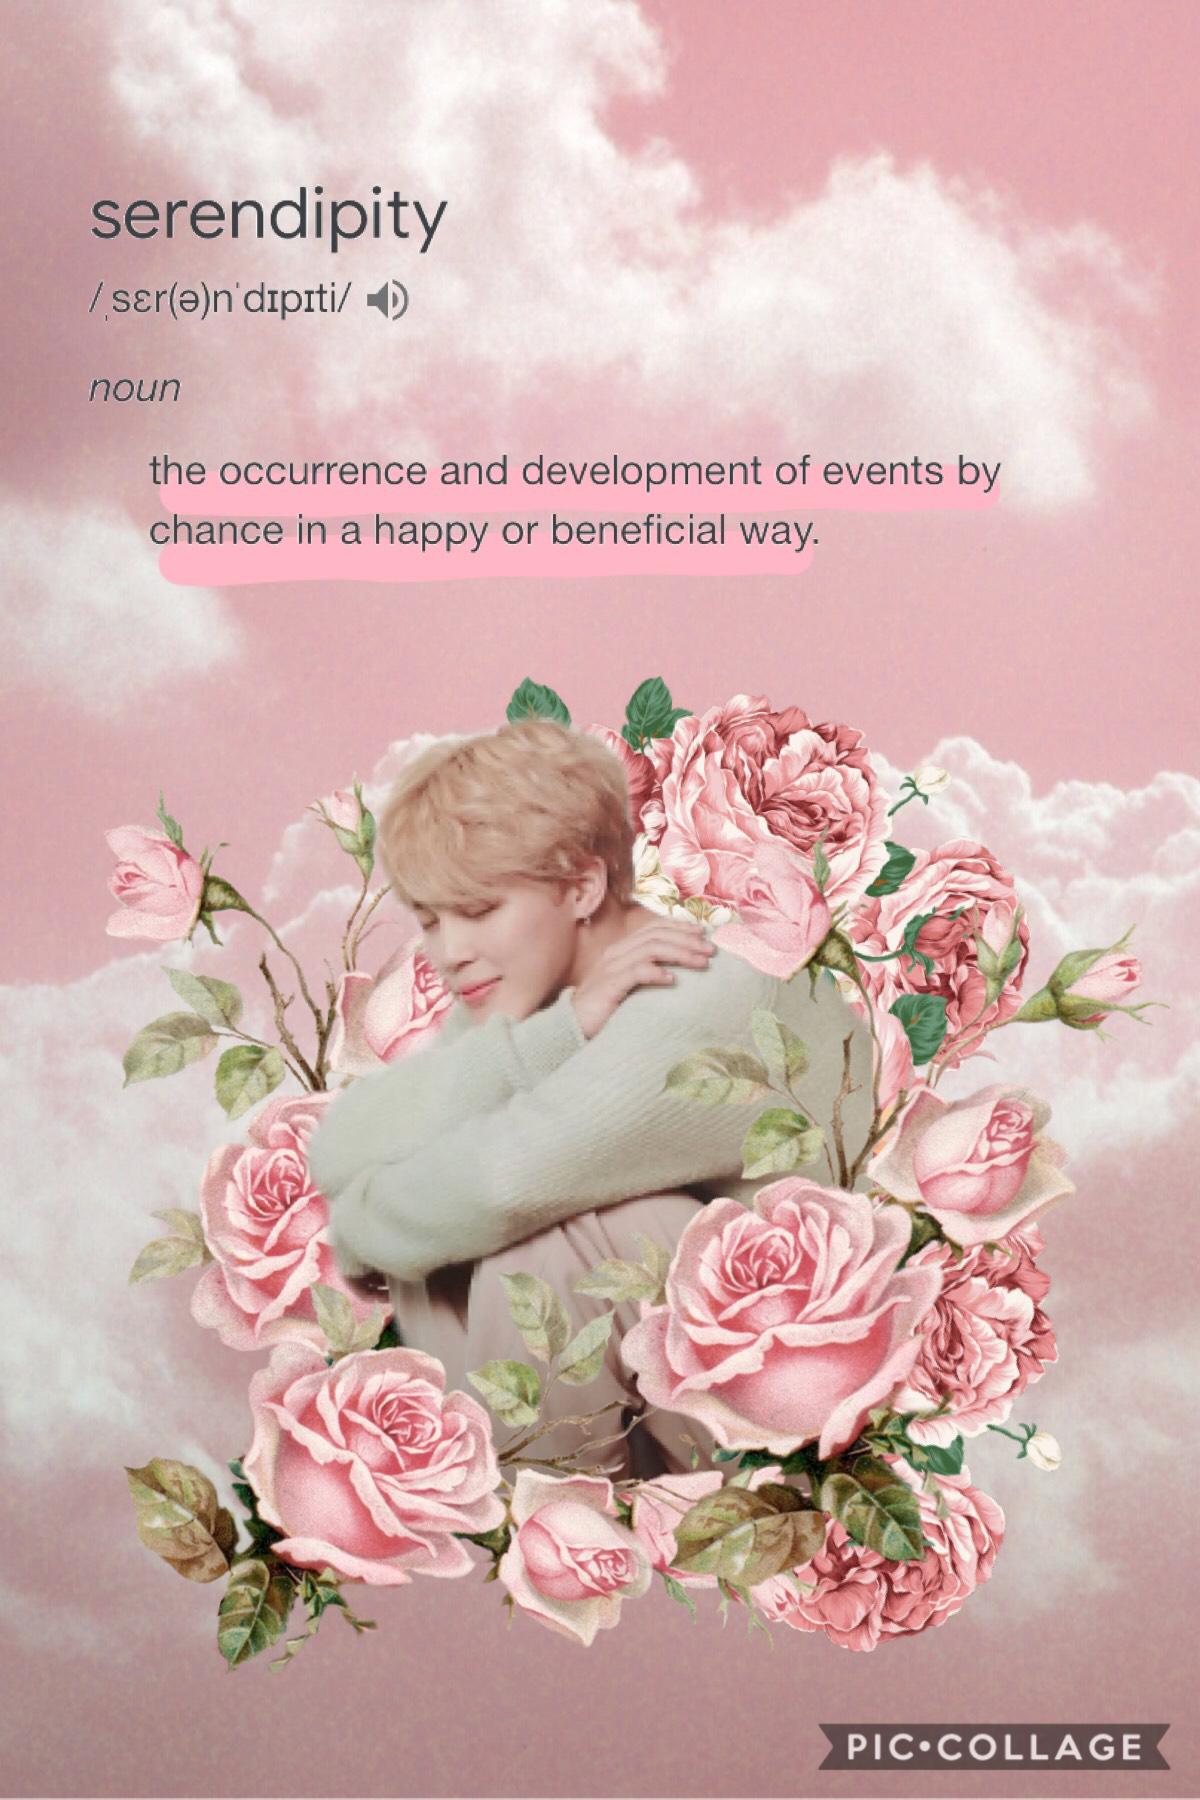 💞Tap💞
-
Omg I haven’t posted an edit in AGES I’ve been so busy and so uninspired 😅
-
Qotd:favourite BTS song?
-
Aotd: oooo that’s a hard one... seesaw? serendipity? Best of Me? I LOVE ALL